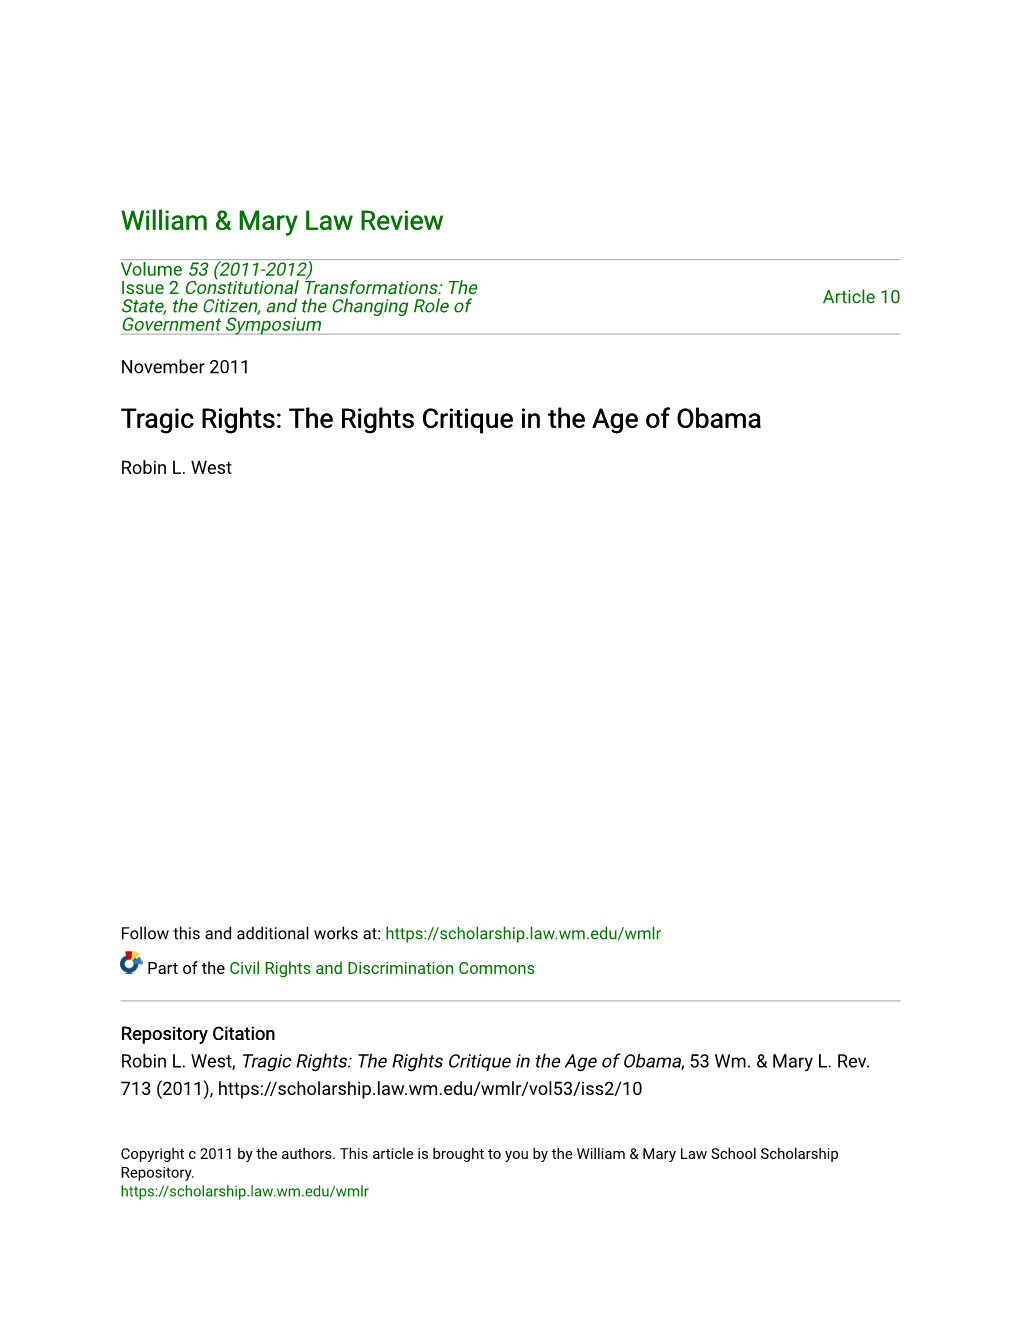 Tragic Rights: the Rights Critique in the Age of Obama